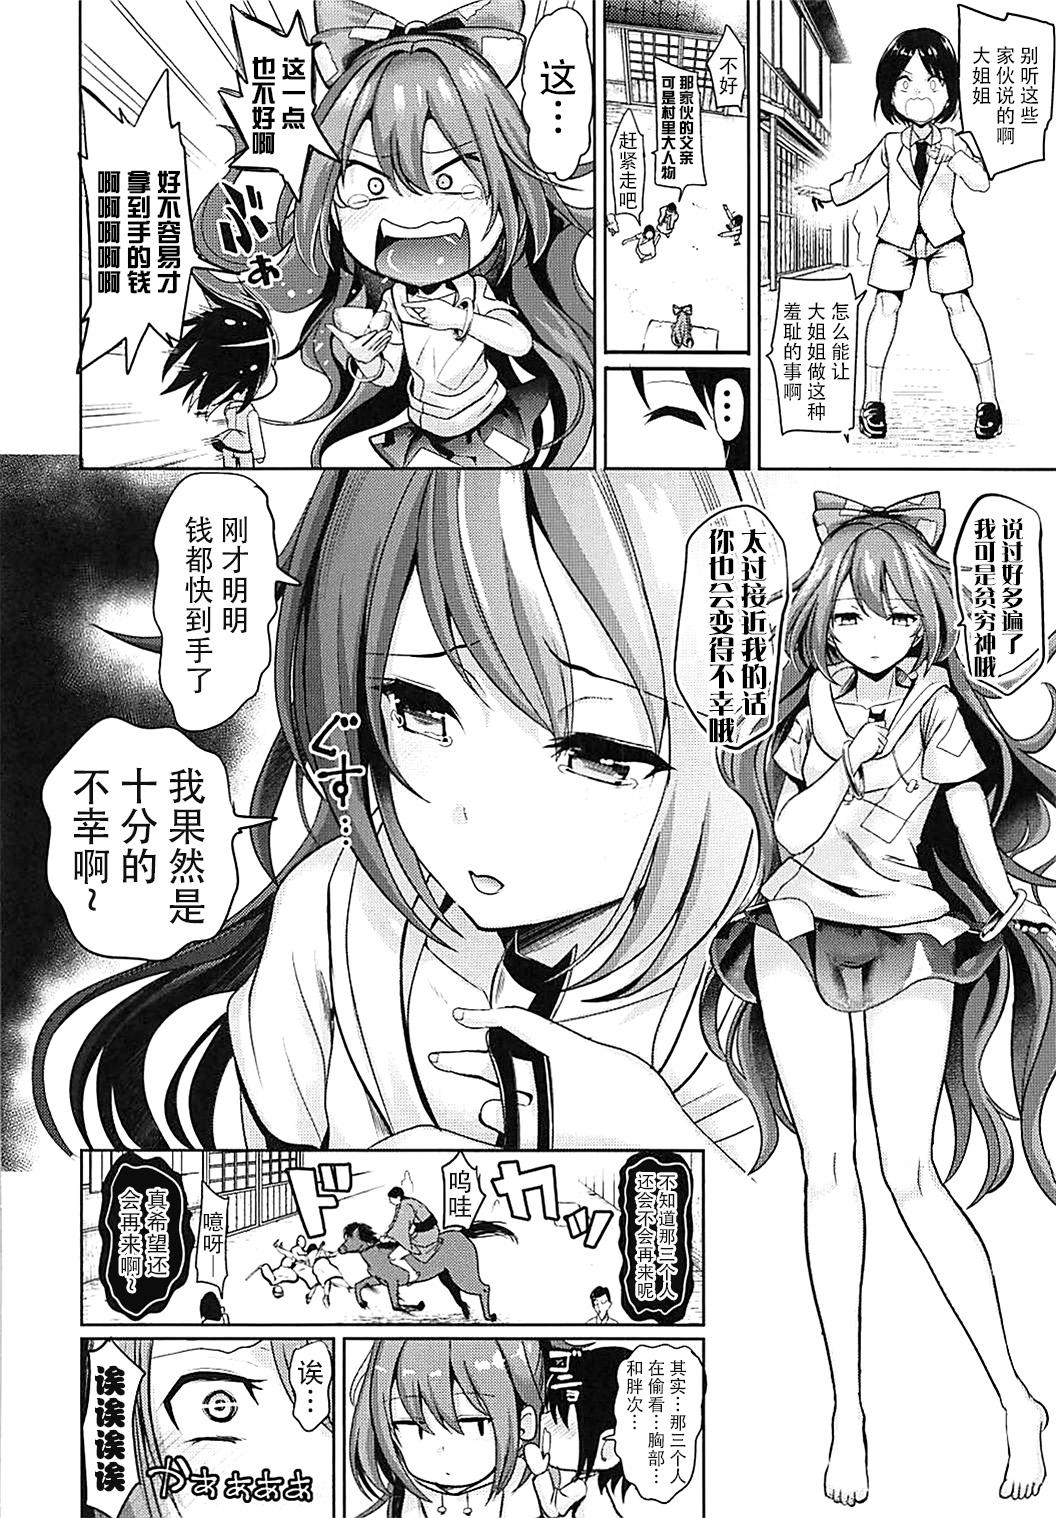 Old And Young Touhou Ane Love 1 Yorigami Shion - Touhou project Hard Porn - Page 4